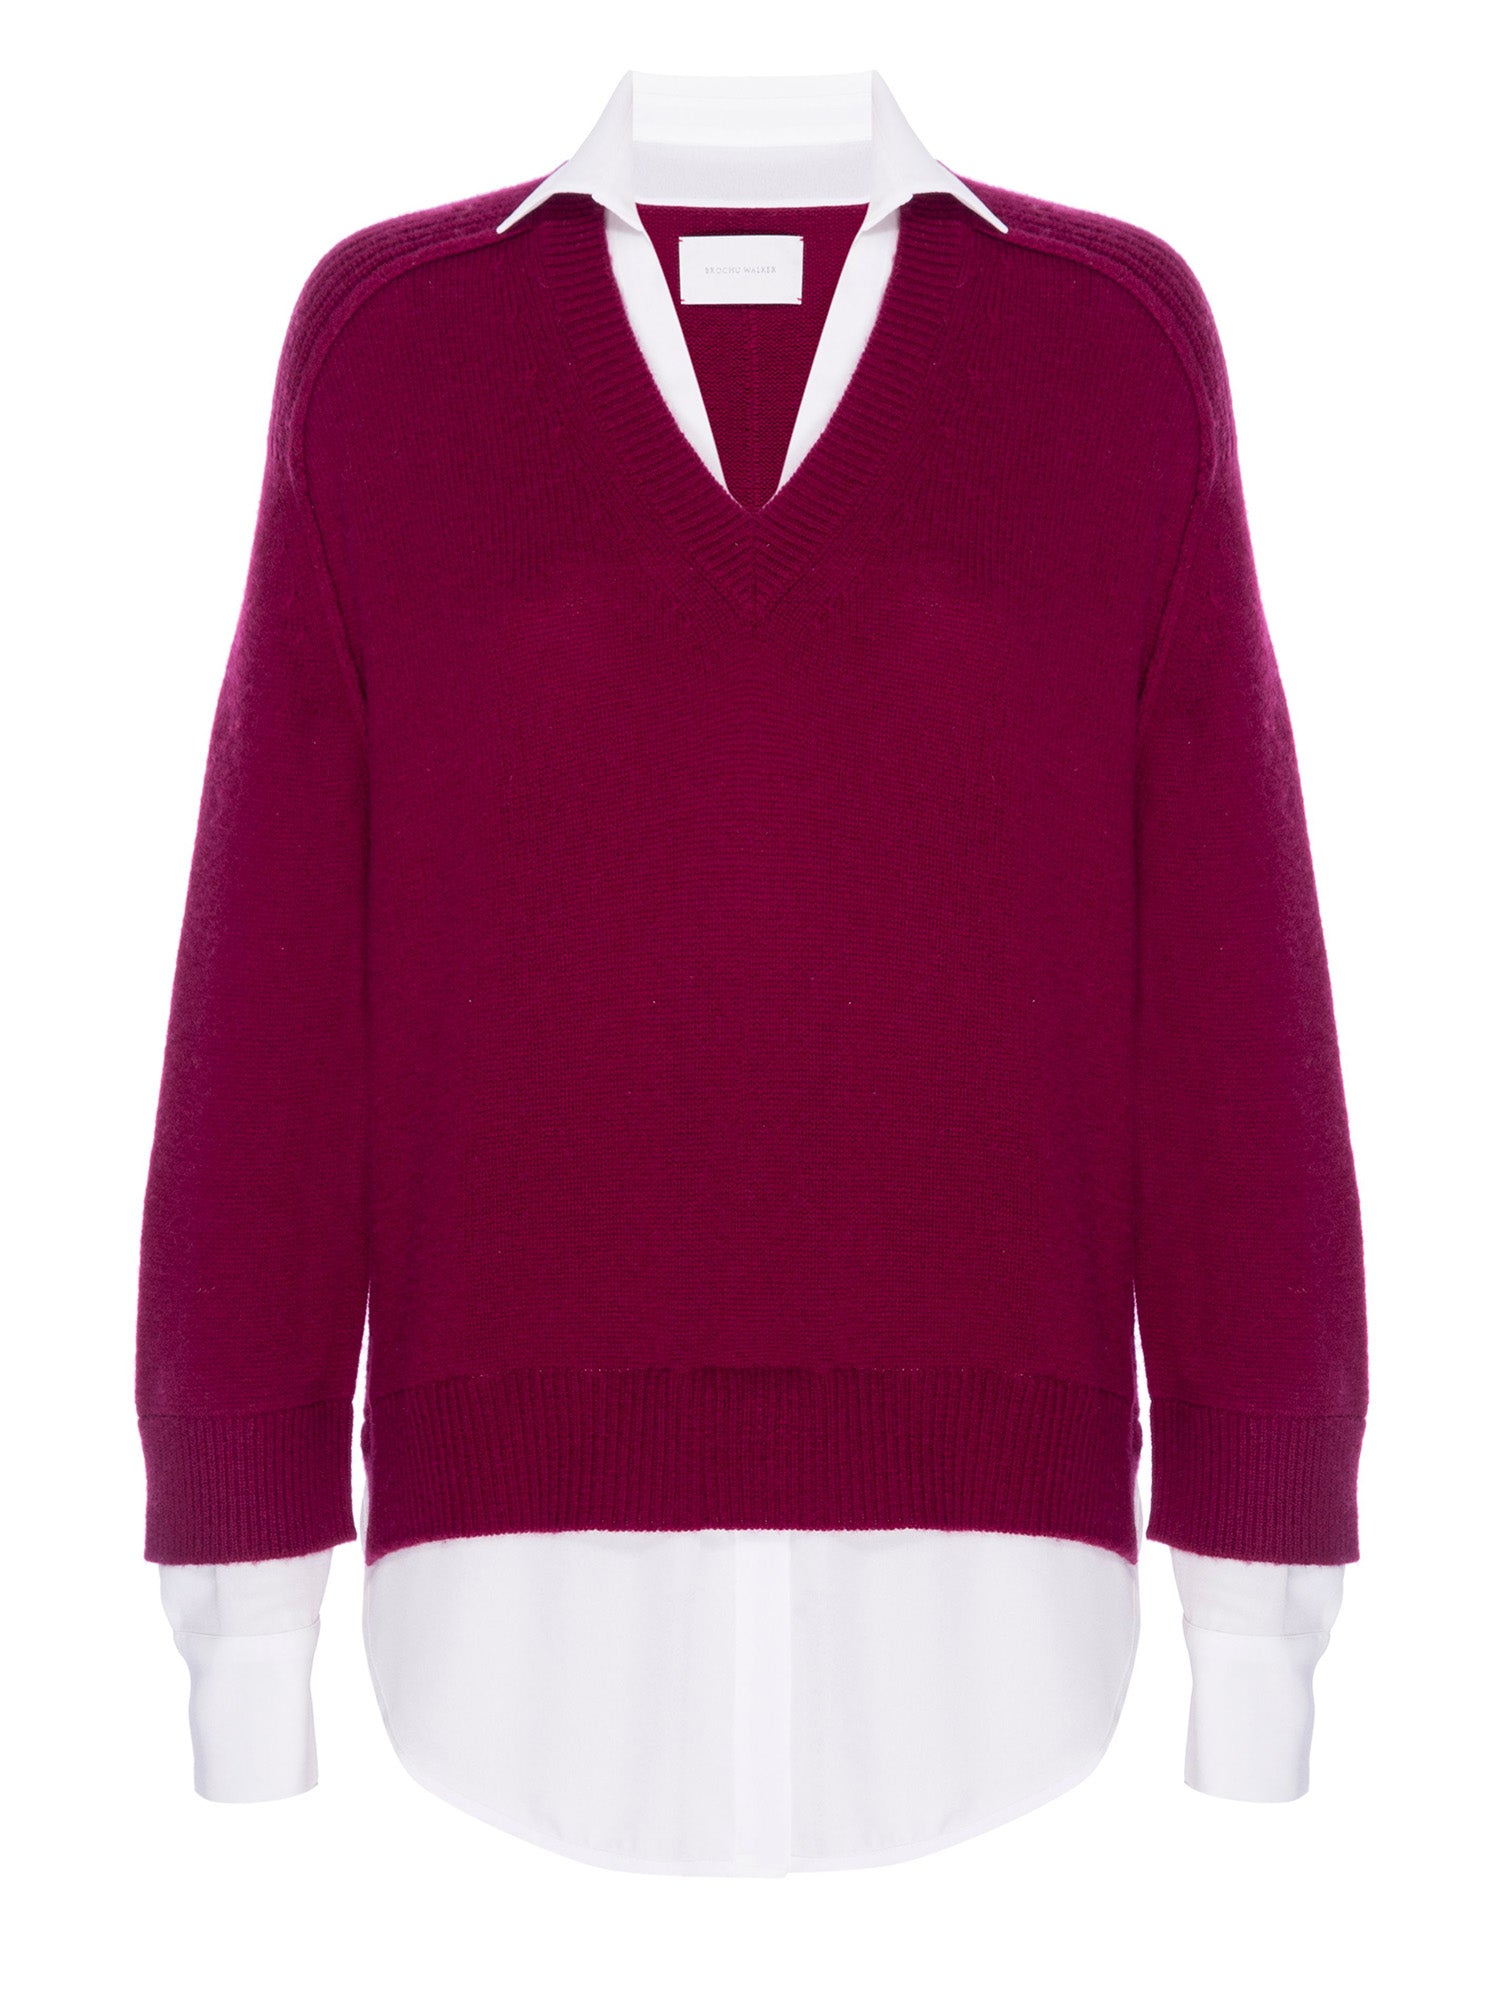 Looker dark red layered v-neck sweater flat view